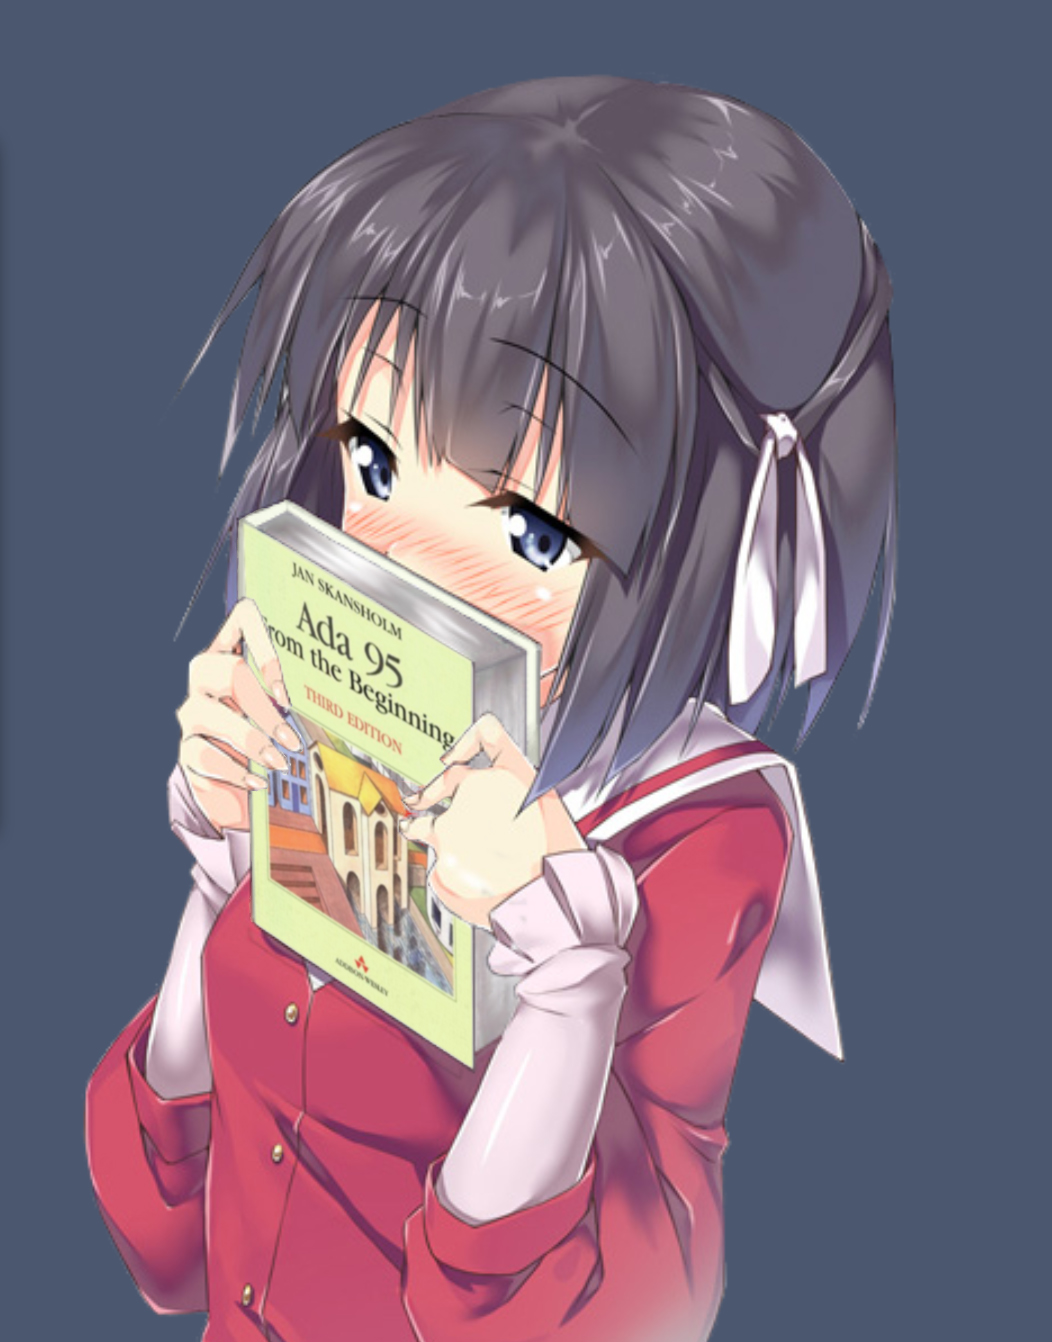 every day an anime girl holding programming books